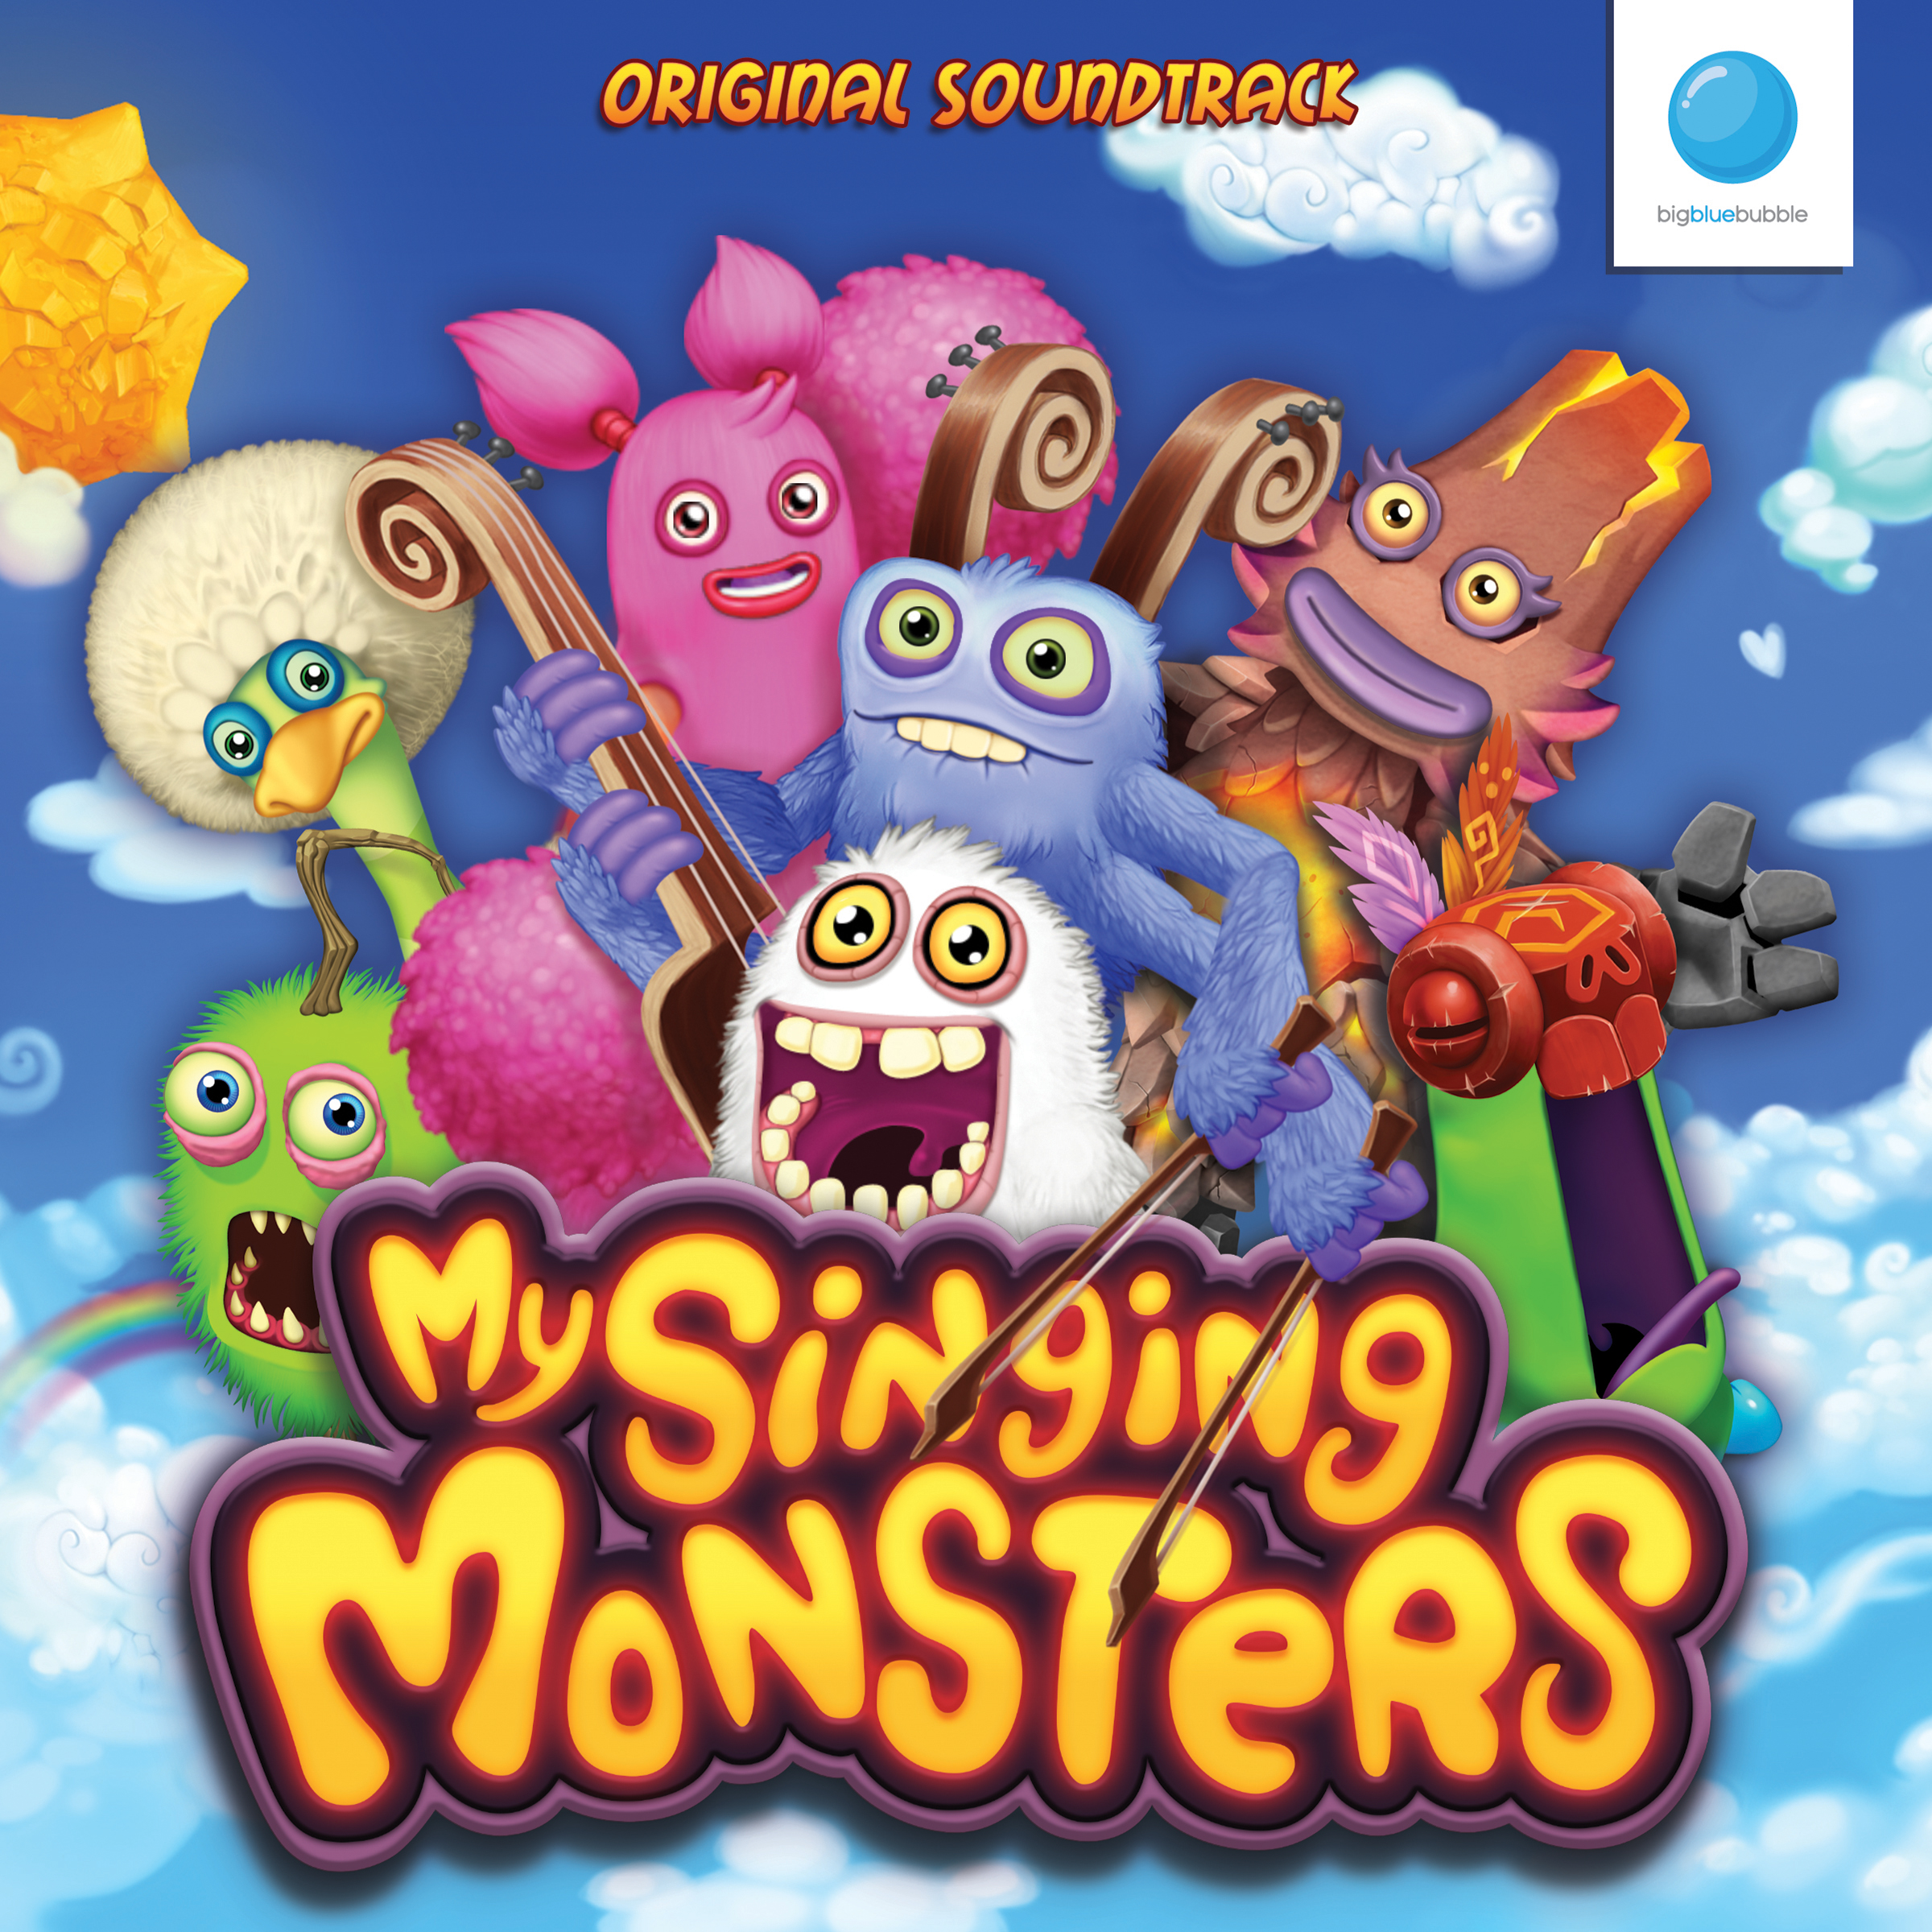 master of monsters soundtrack